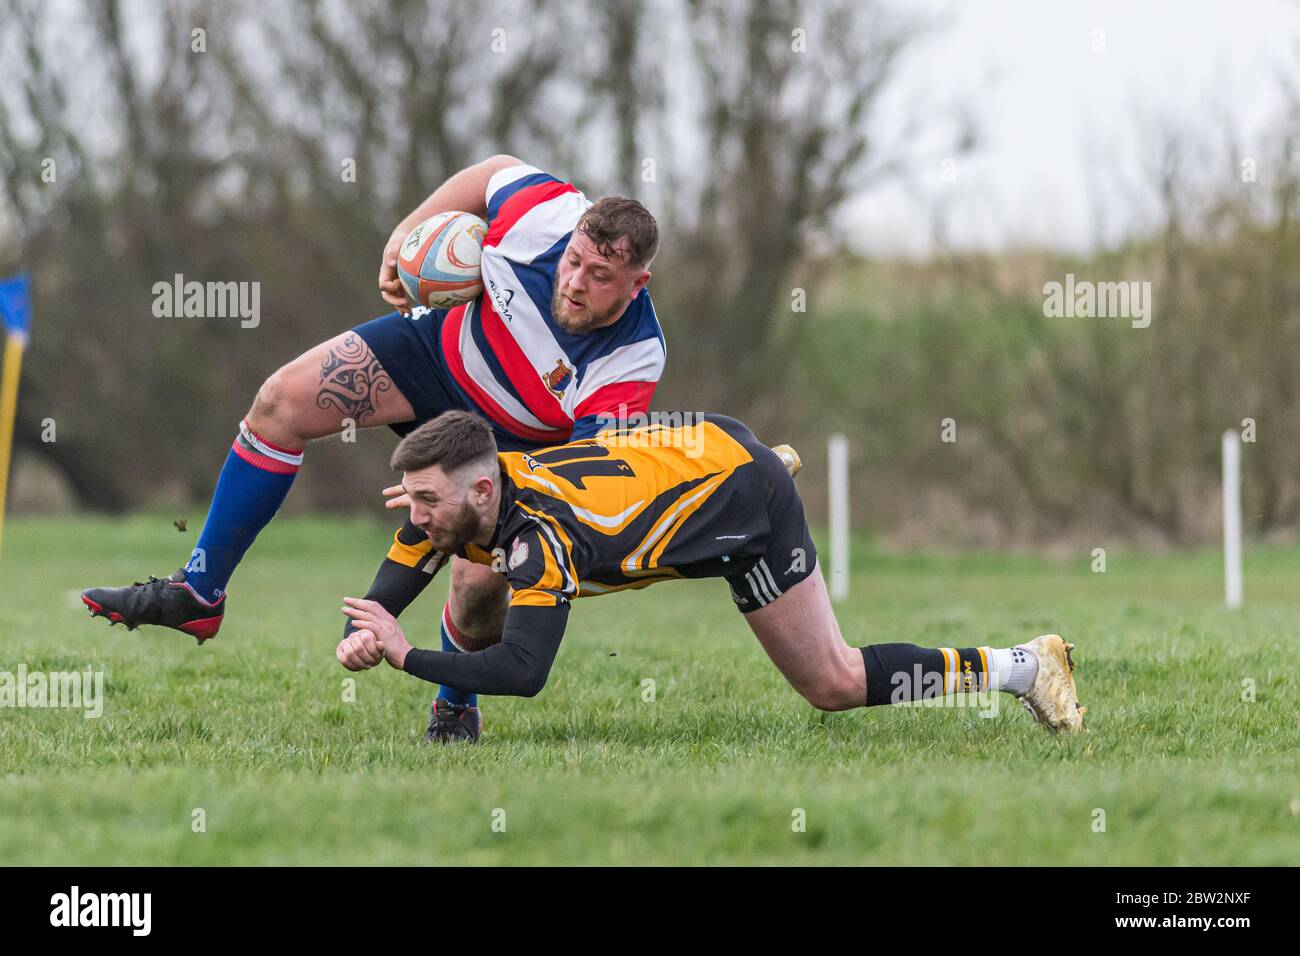 Senior player holding ball under one arm pushes off tackler who is falling to the ground. Eastern Counties rugby union match at Lowestoft Stock Photo